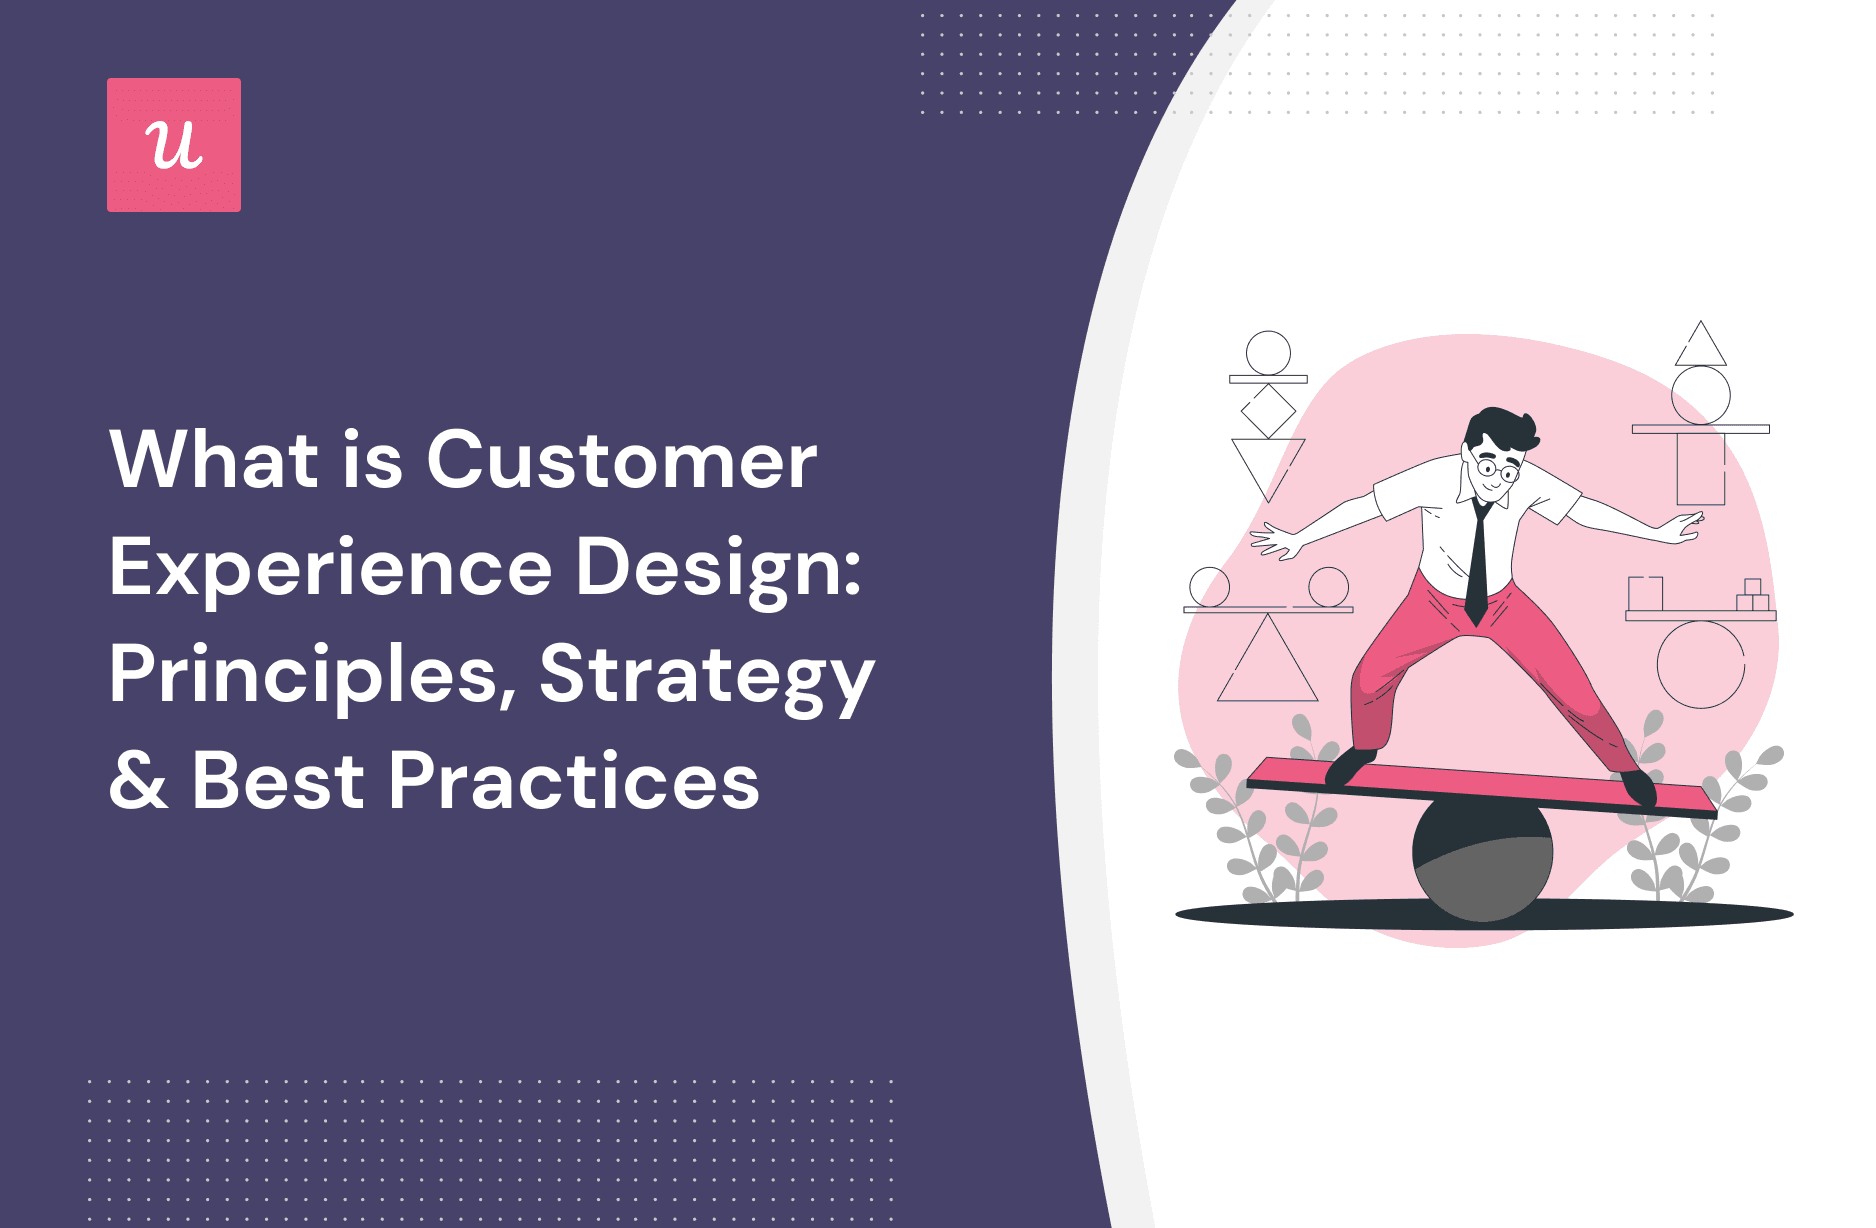 What is Customer Experience Design: Principles, Strategy & Best Practices cover